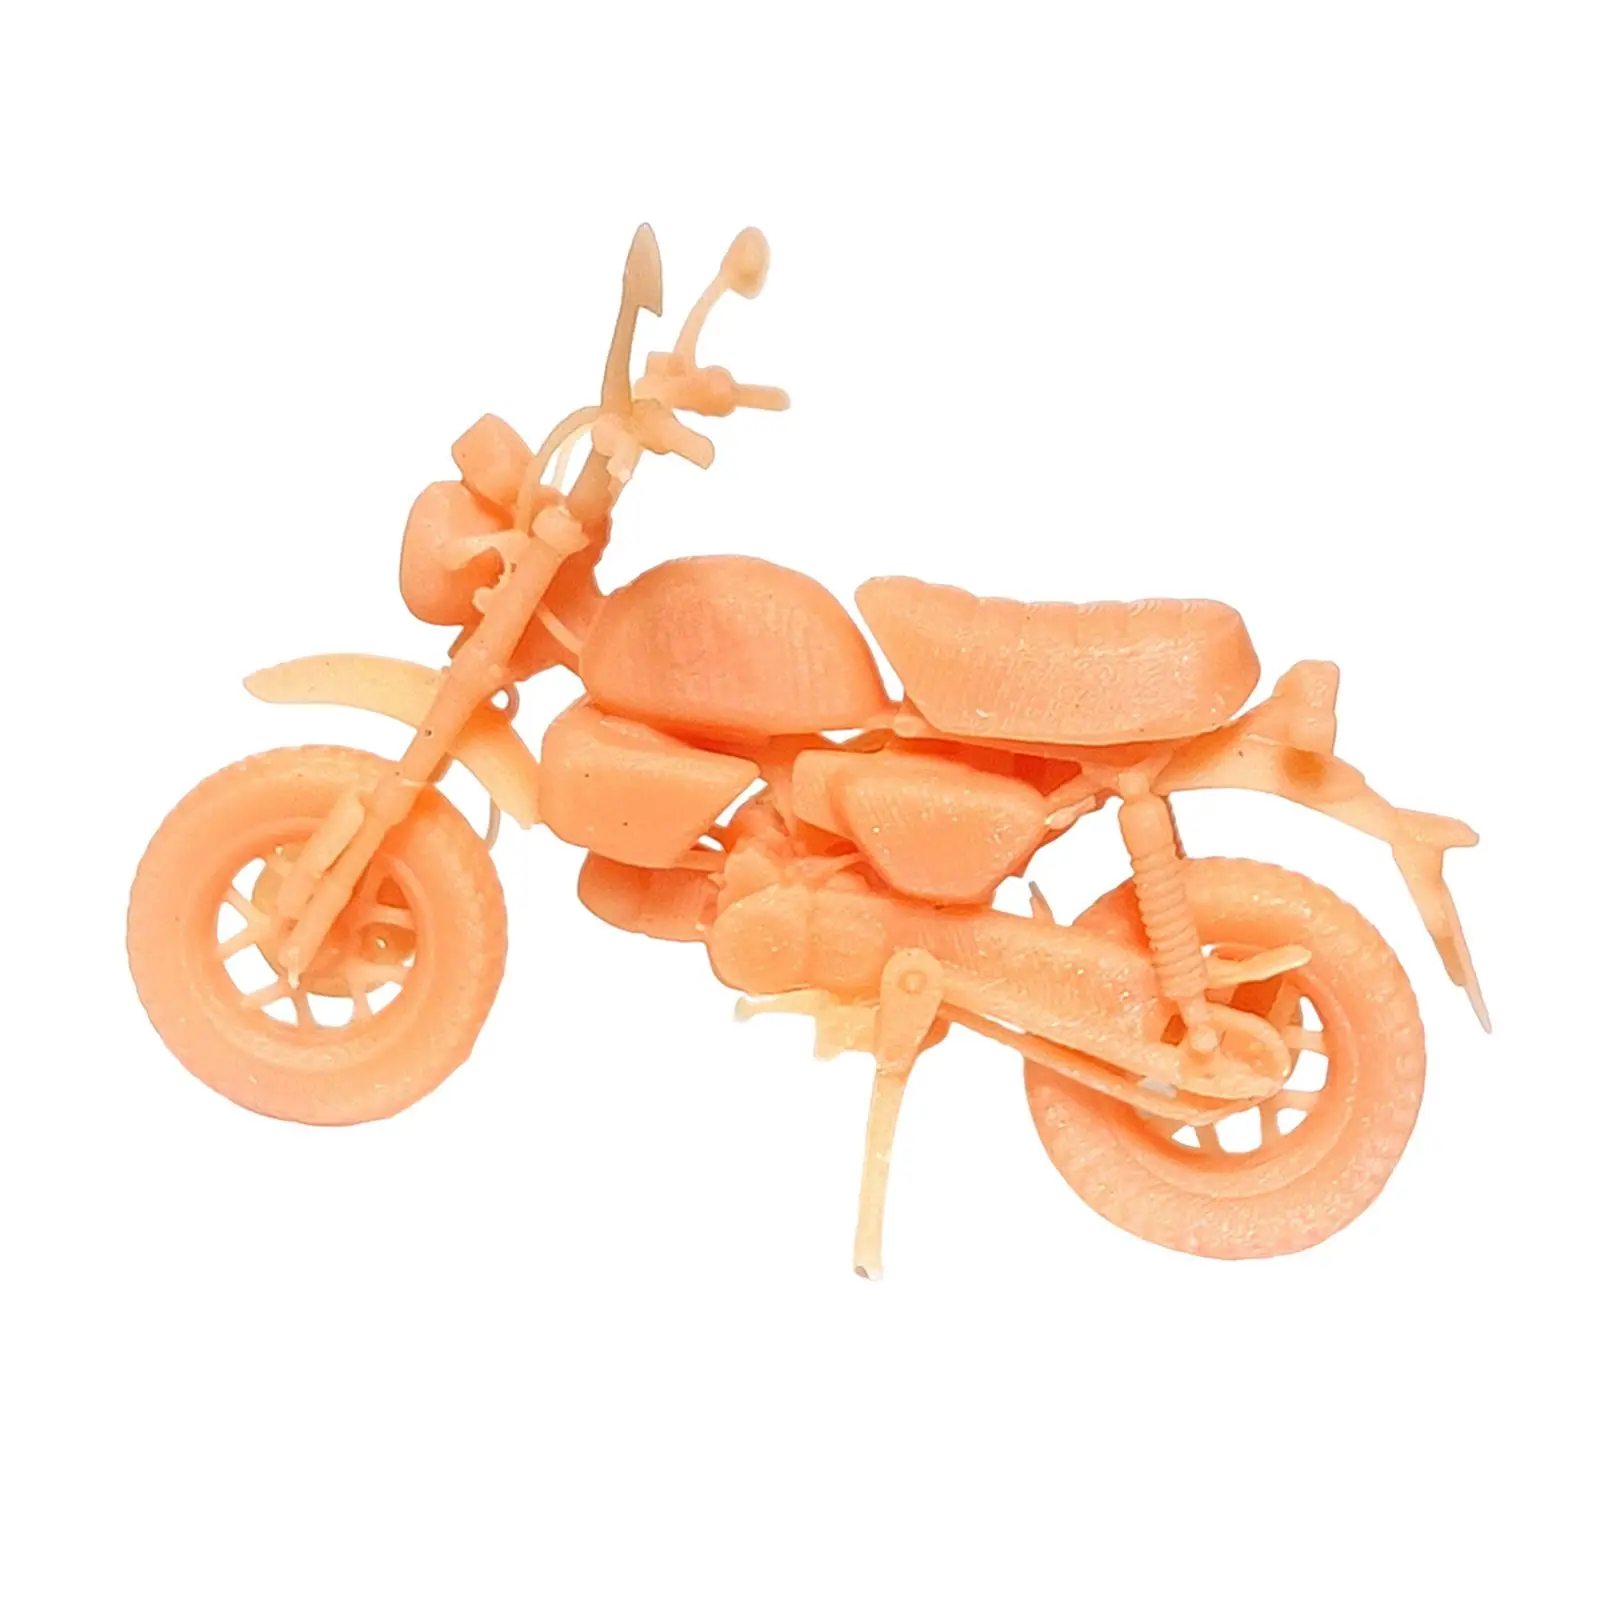 Realistic 1/64 Motorcycle Model Mini Motorcycle Tiny Motorcycle for Miniature Scenes DIY Projects Diorama Layout Decor